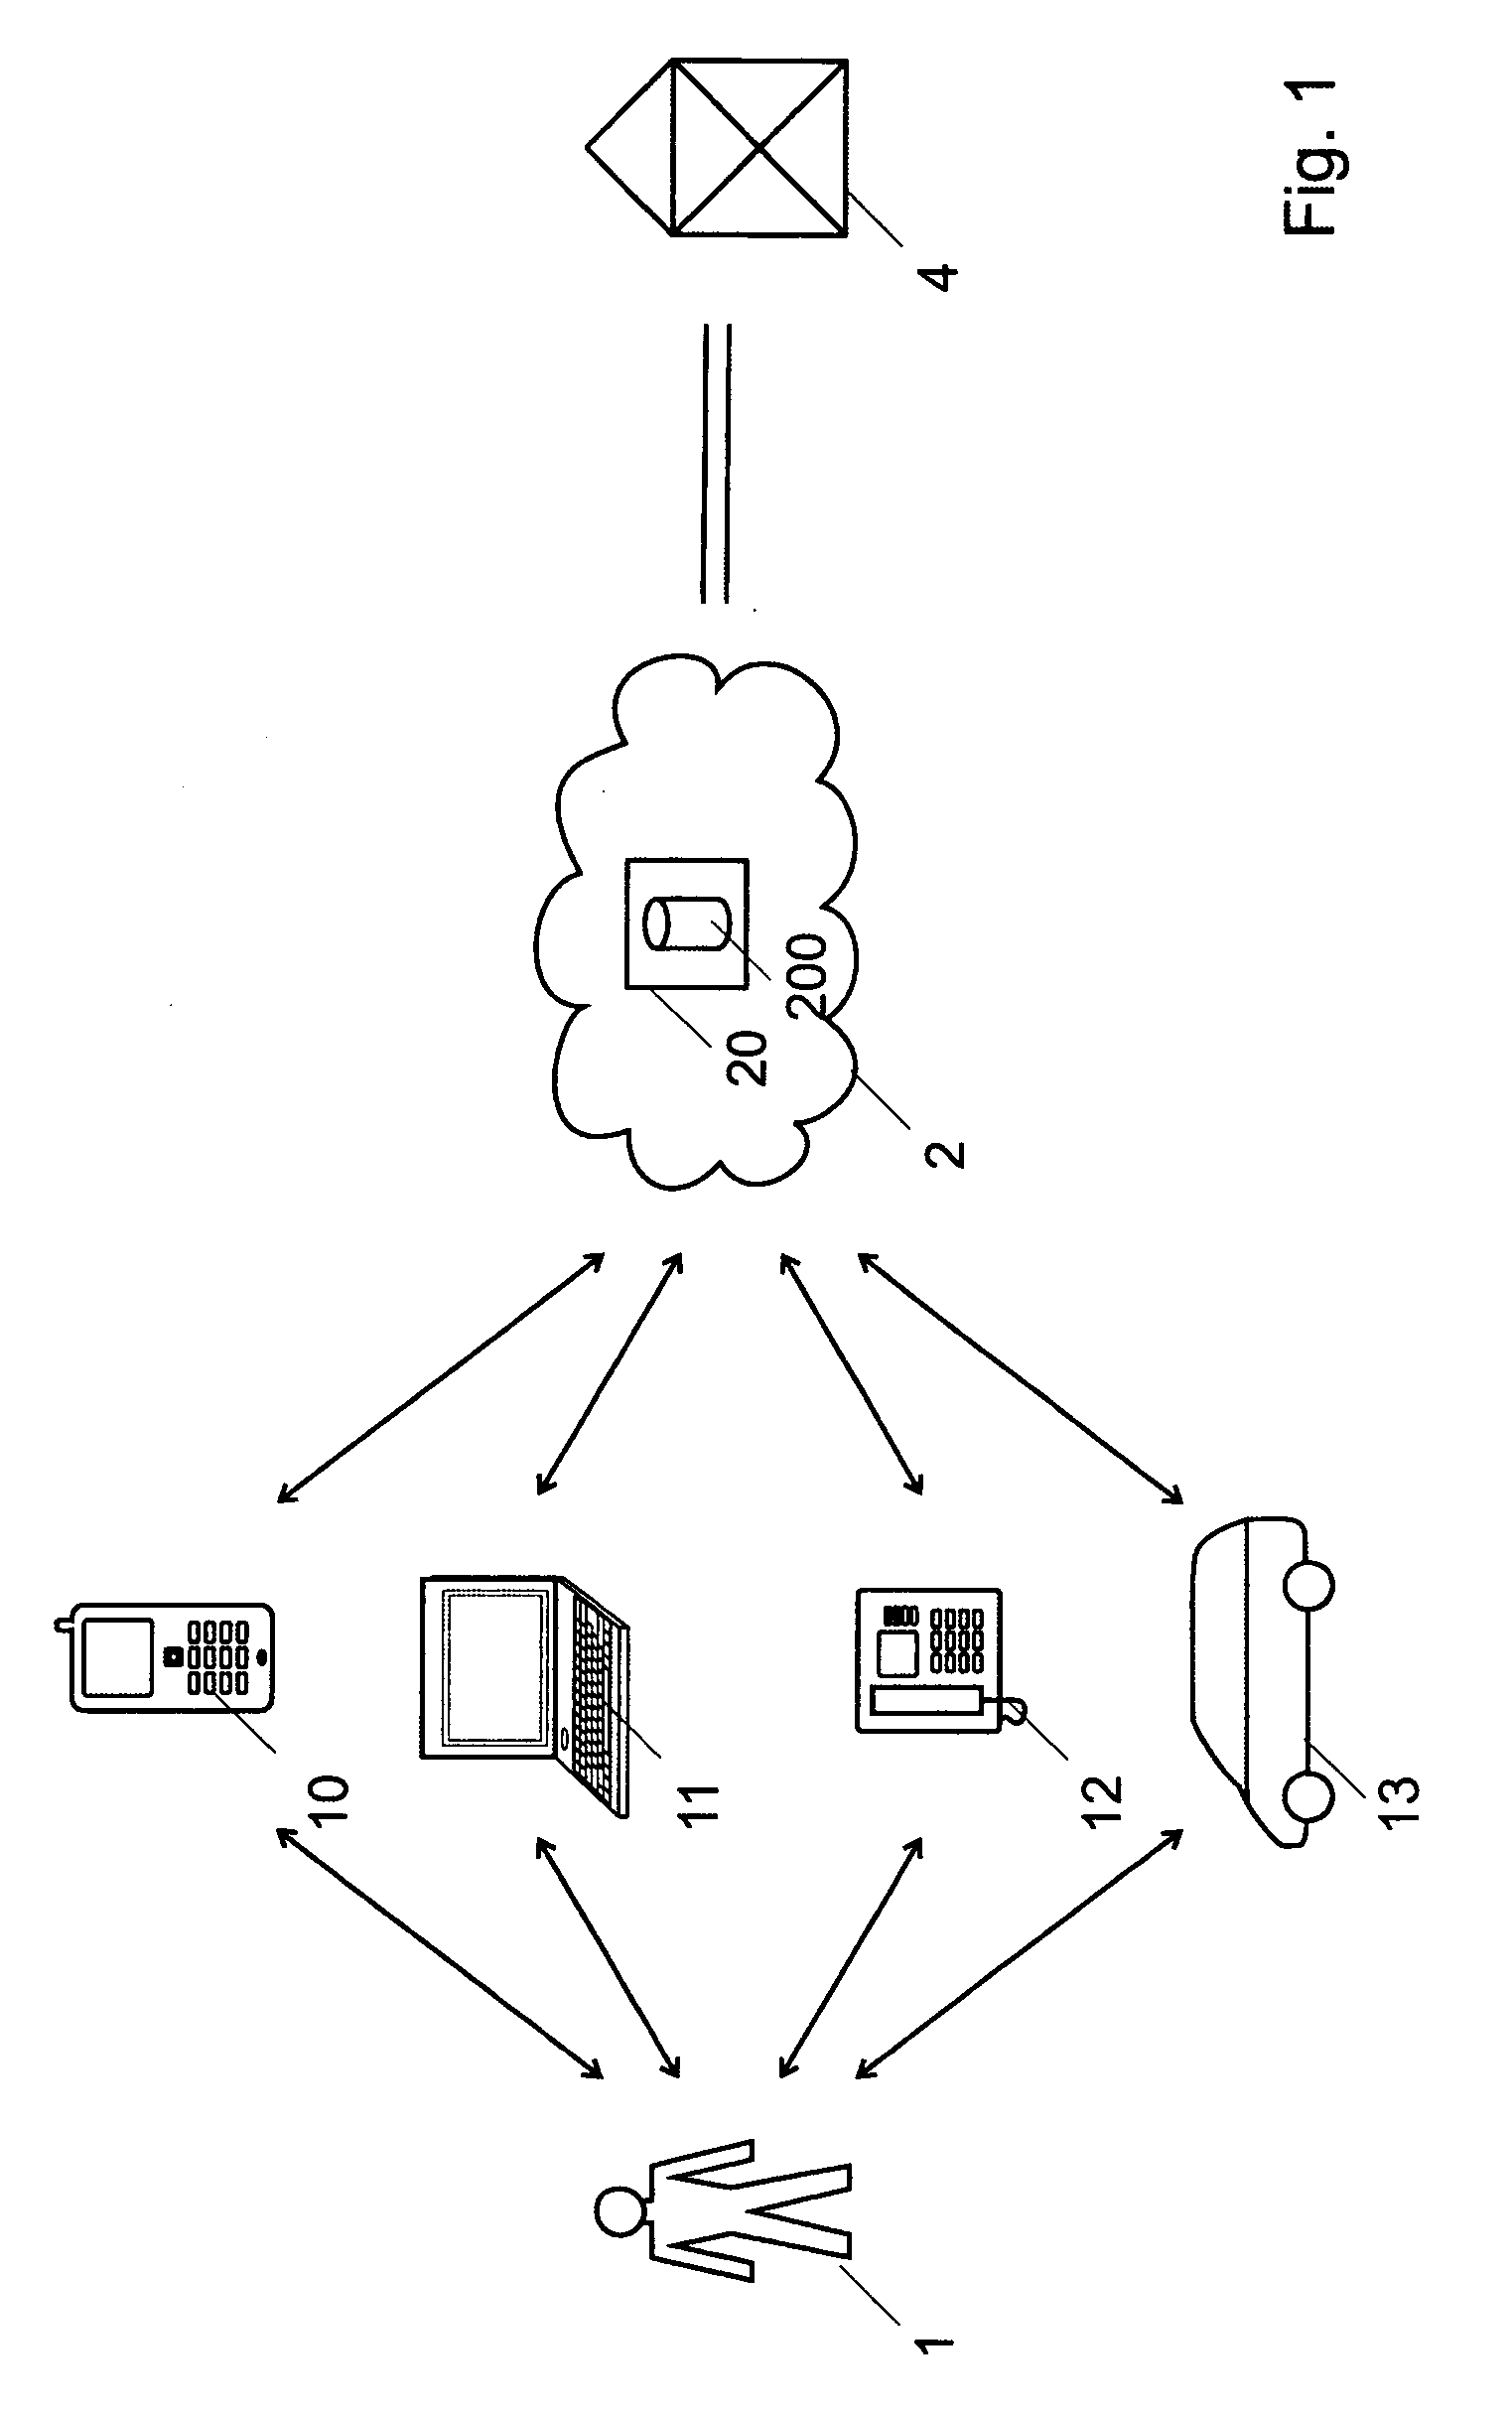 Method for personalization of a service